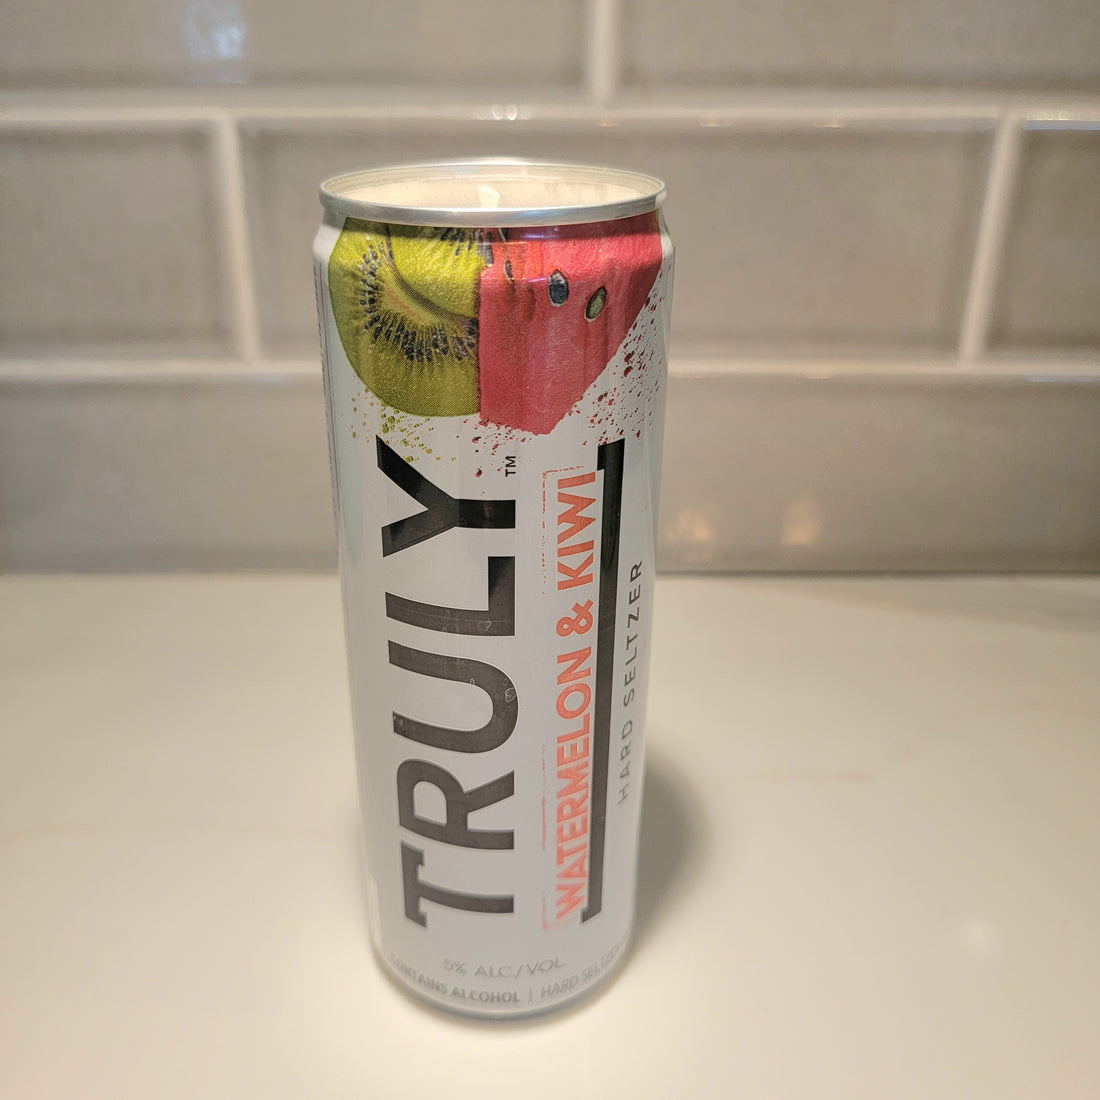 Truly Strawberry Kiwi Hard Seltzer Candle - Cucumber & Melon Scented